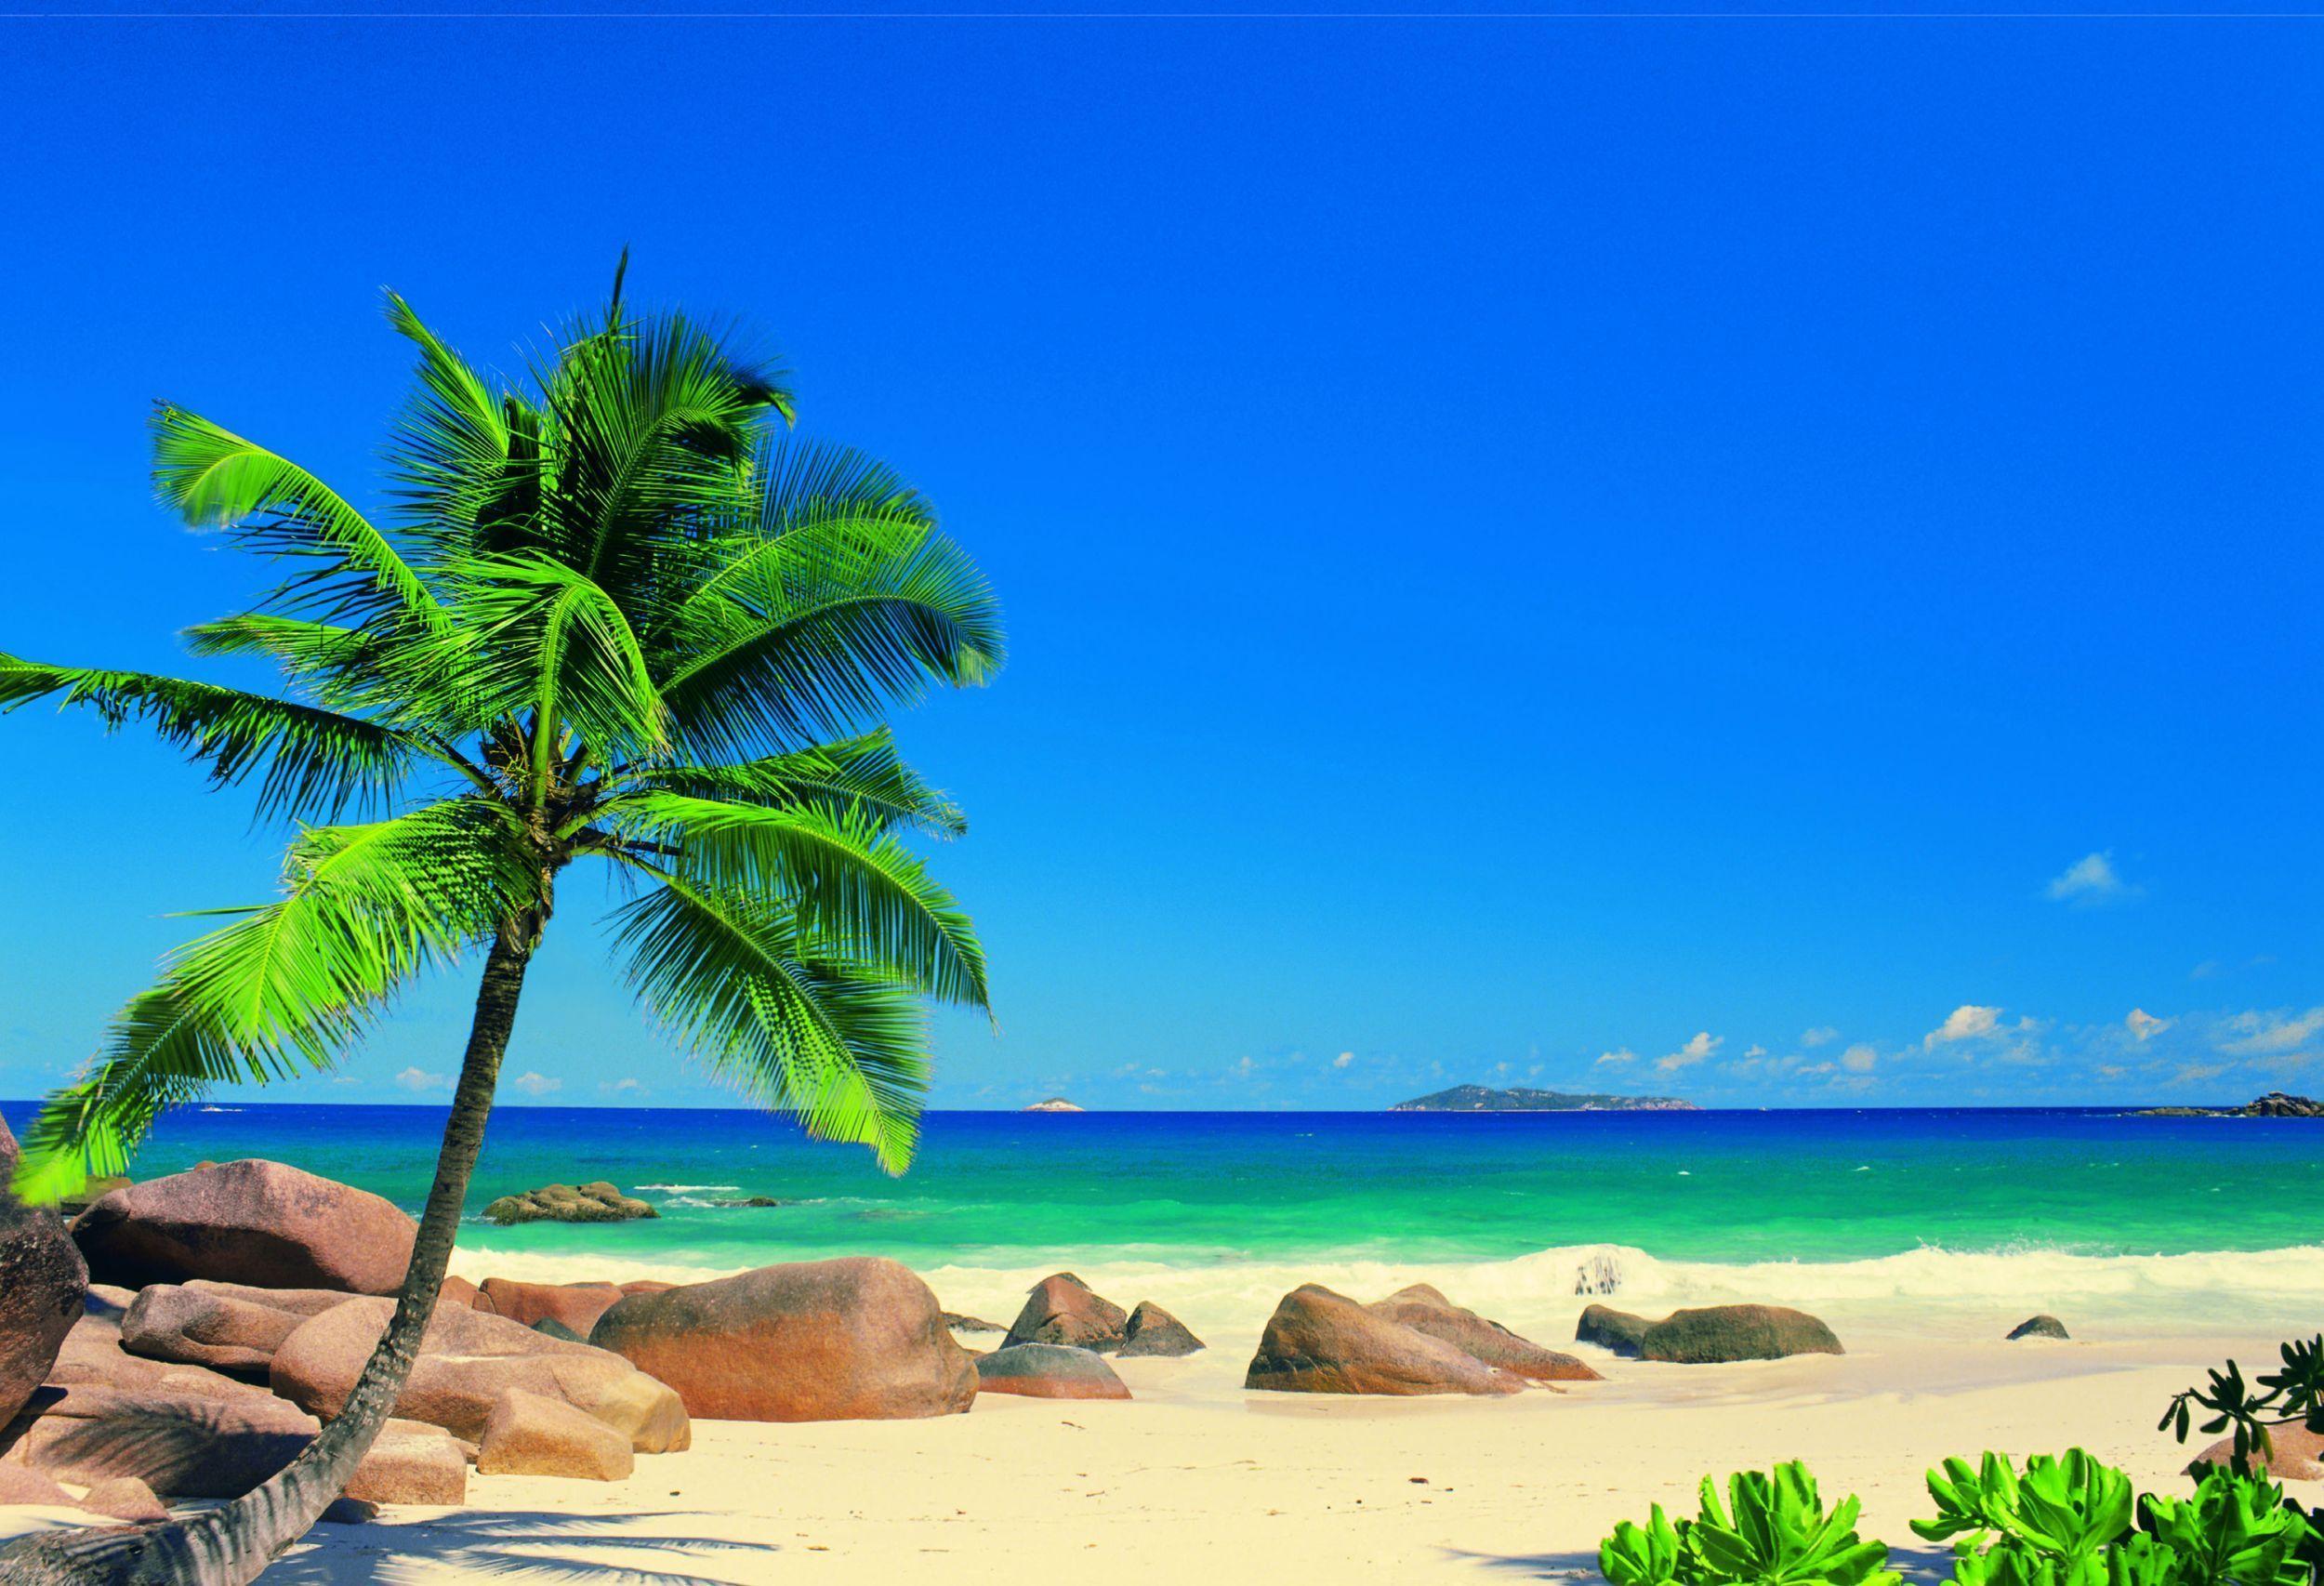 Download These 42 High Res Caribbean Wallpaper Background Here For Free